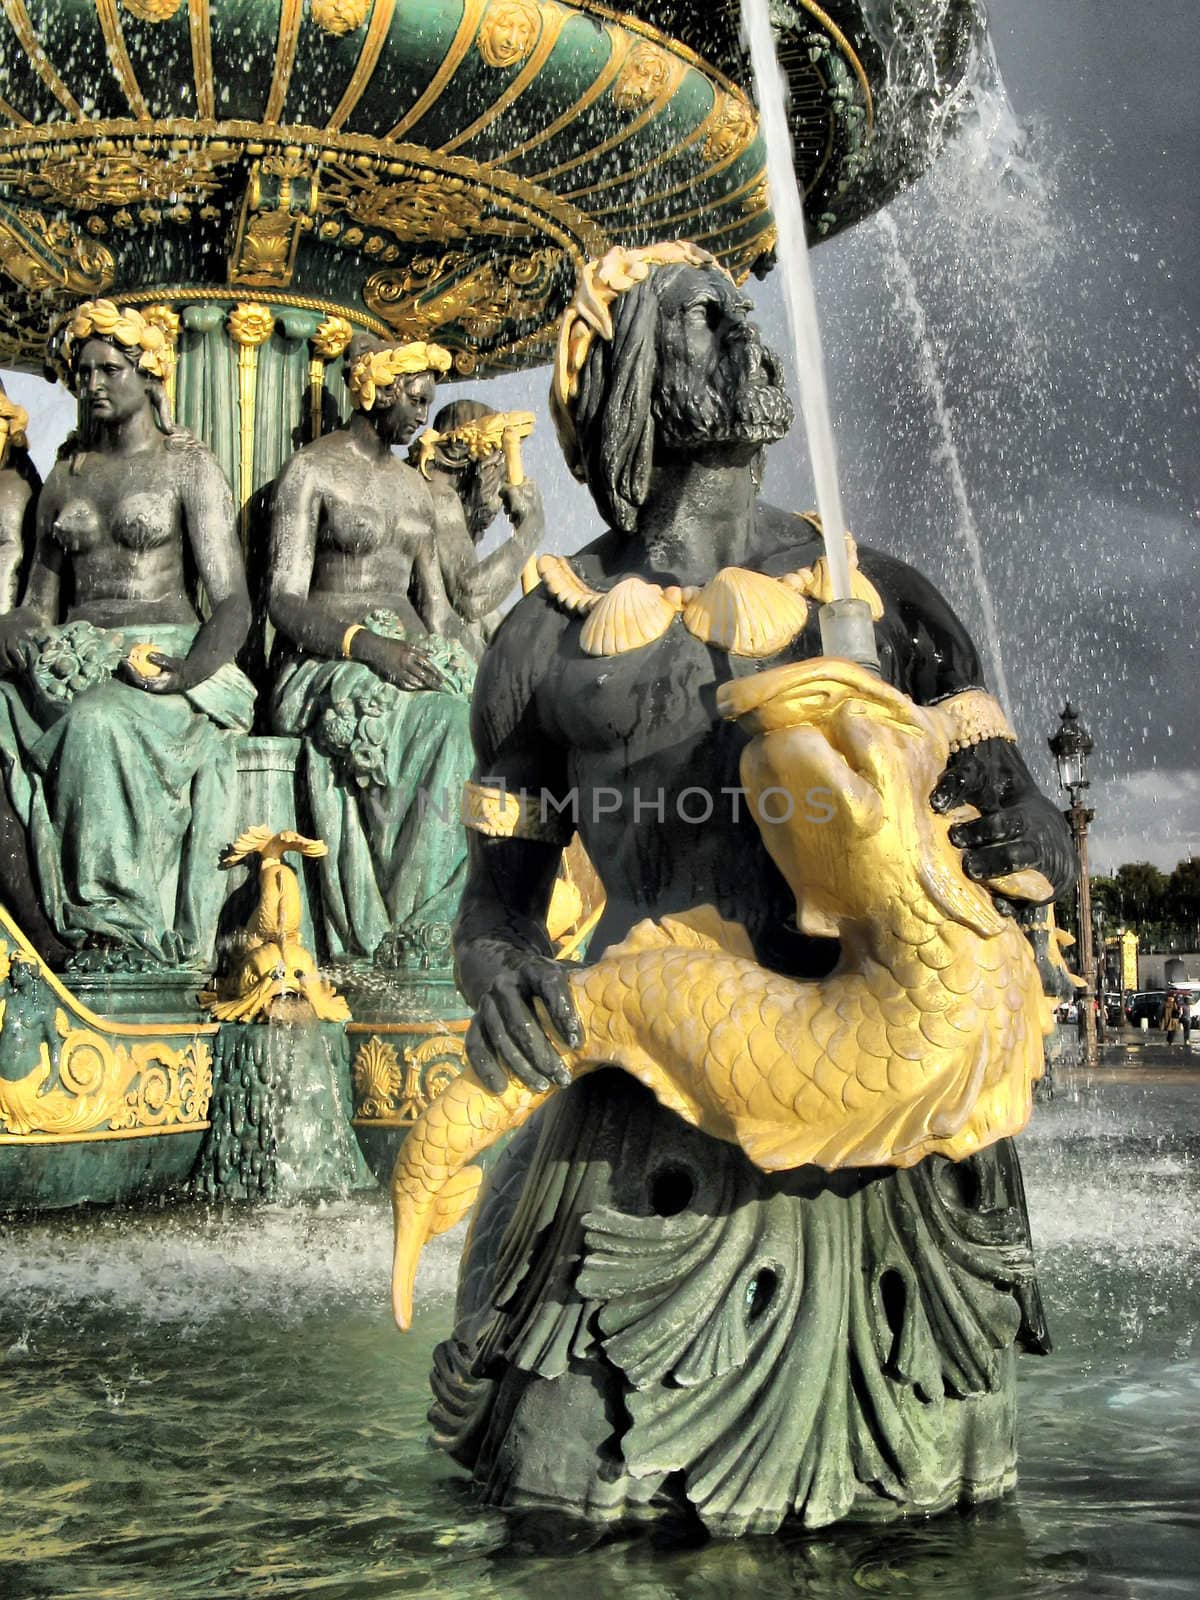 hdr image of a fountain at the Concorde place in Paris